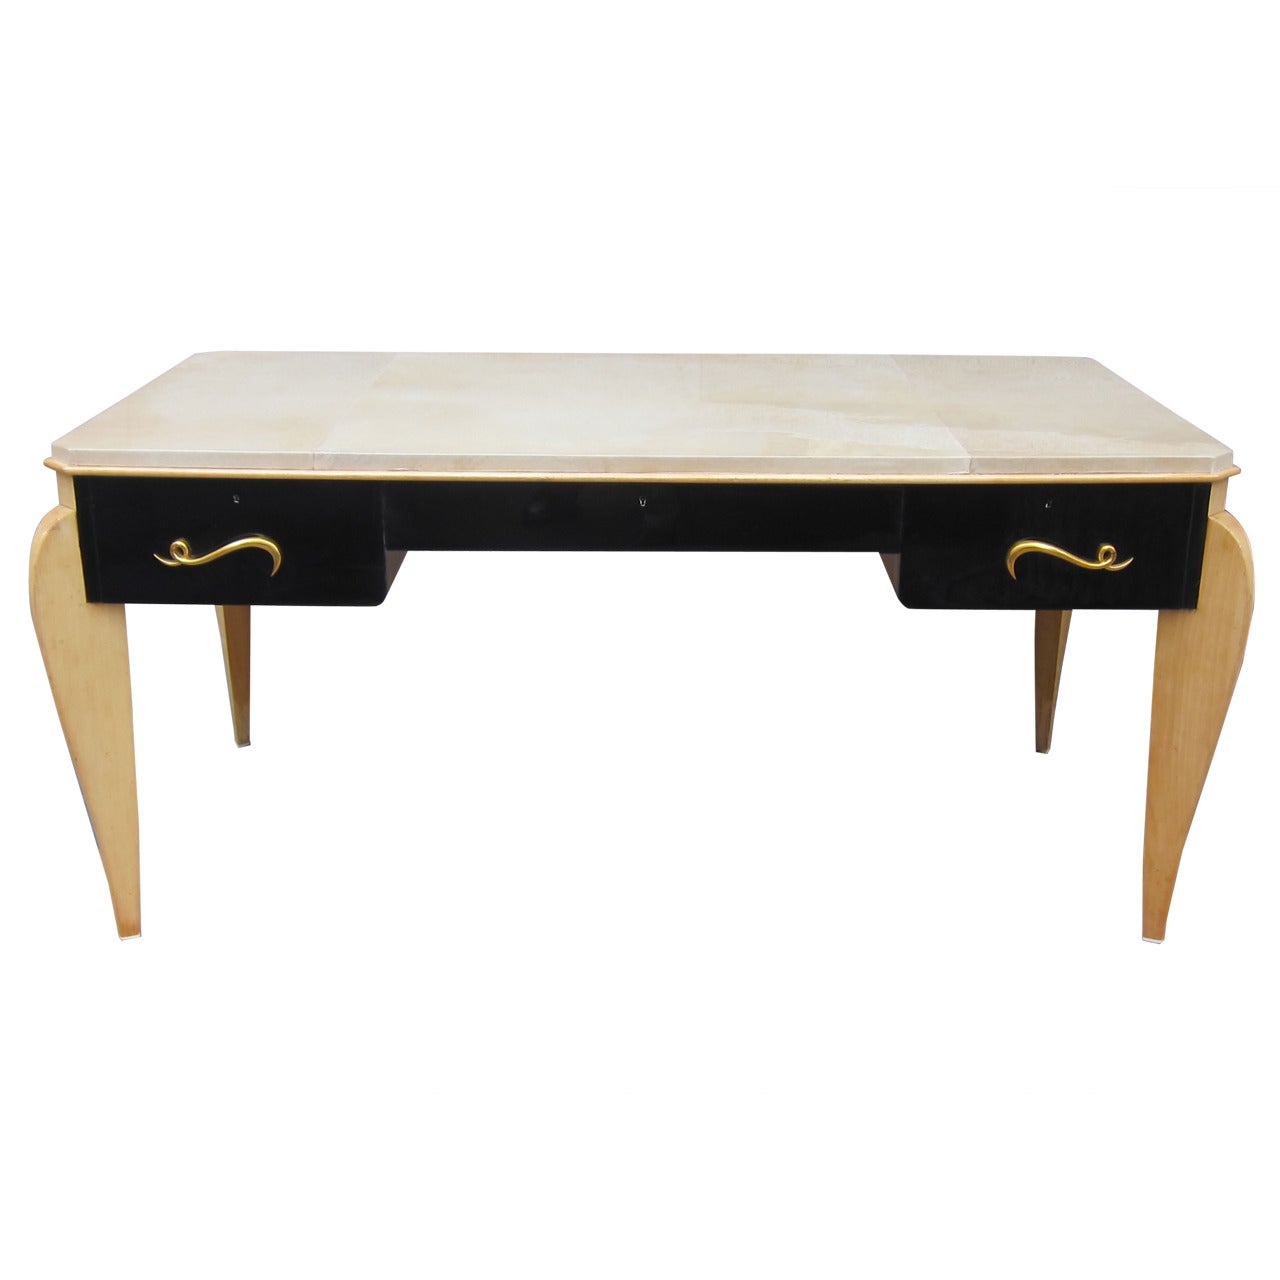 René Prou Sycamore Wood and Parchment-Top Writing Table, France 1940 For Sale